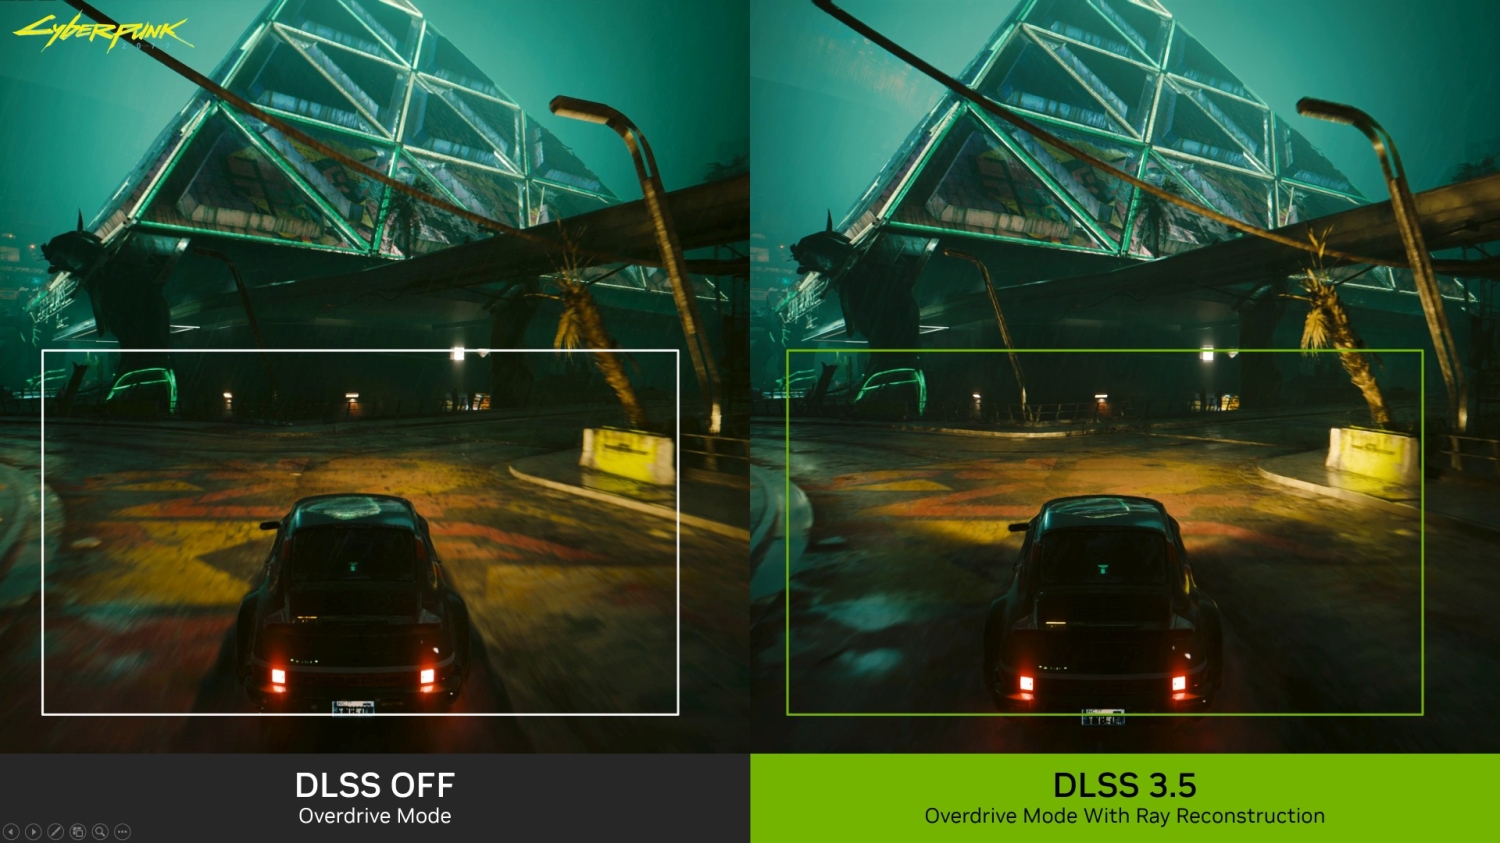 TweakTown Enlarged Image - Cyberpunk 2077's use of DLSS 3.5 vastly improves ray-tracing image quality thanks to AI, image credit: NVIDIA.